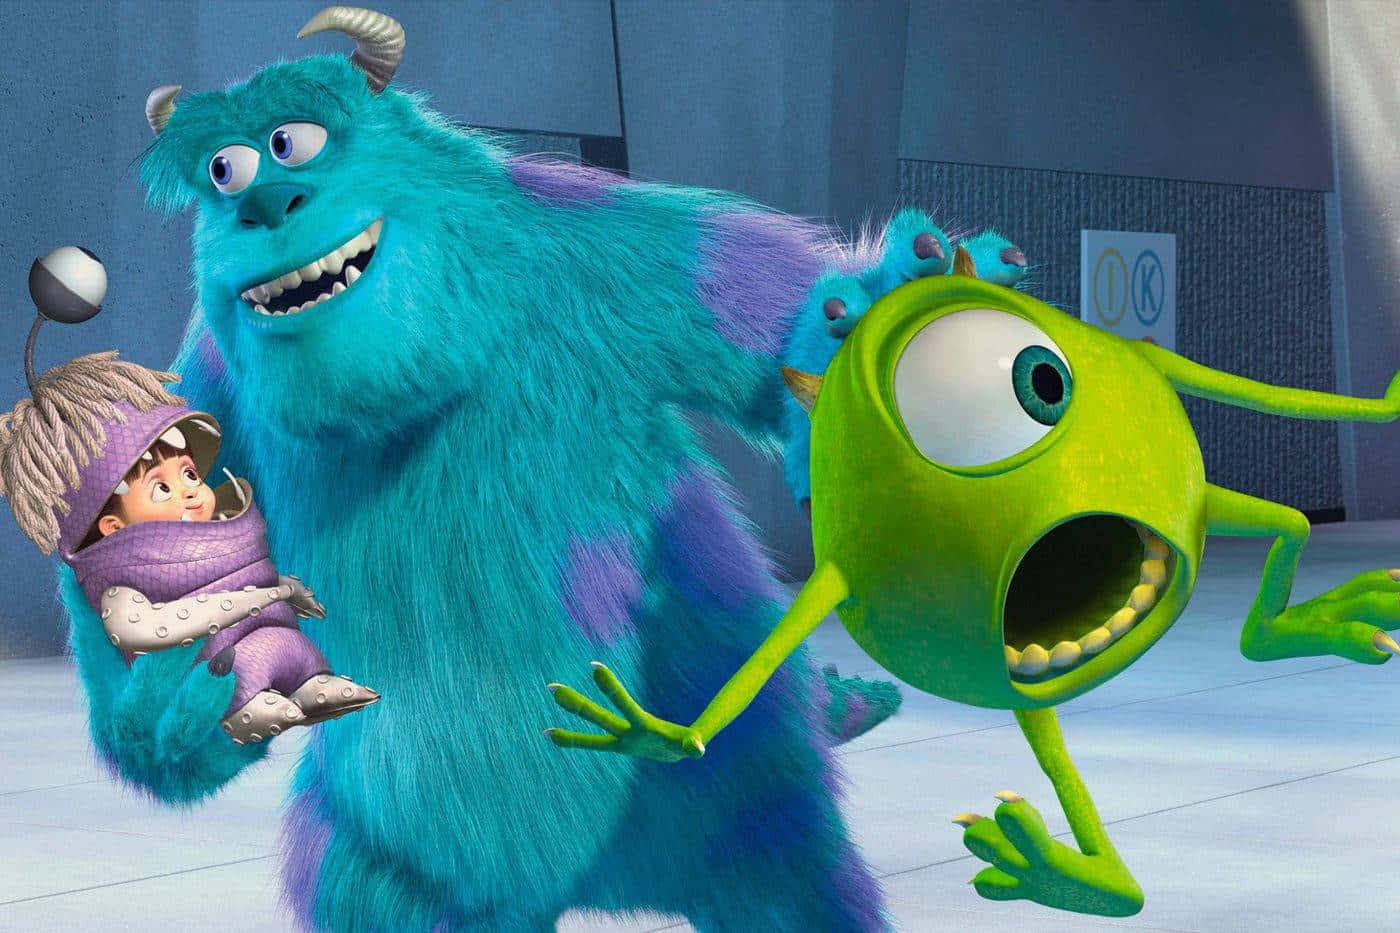 Mike and Sulley Meet Up for Another Fun Day at Monsters, Inc.